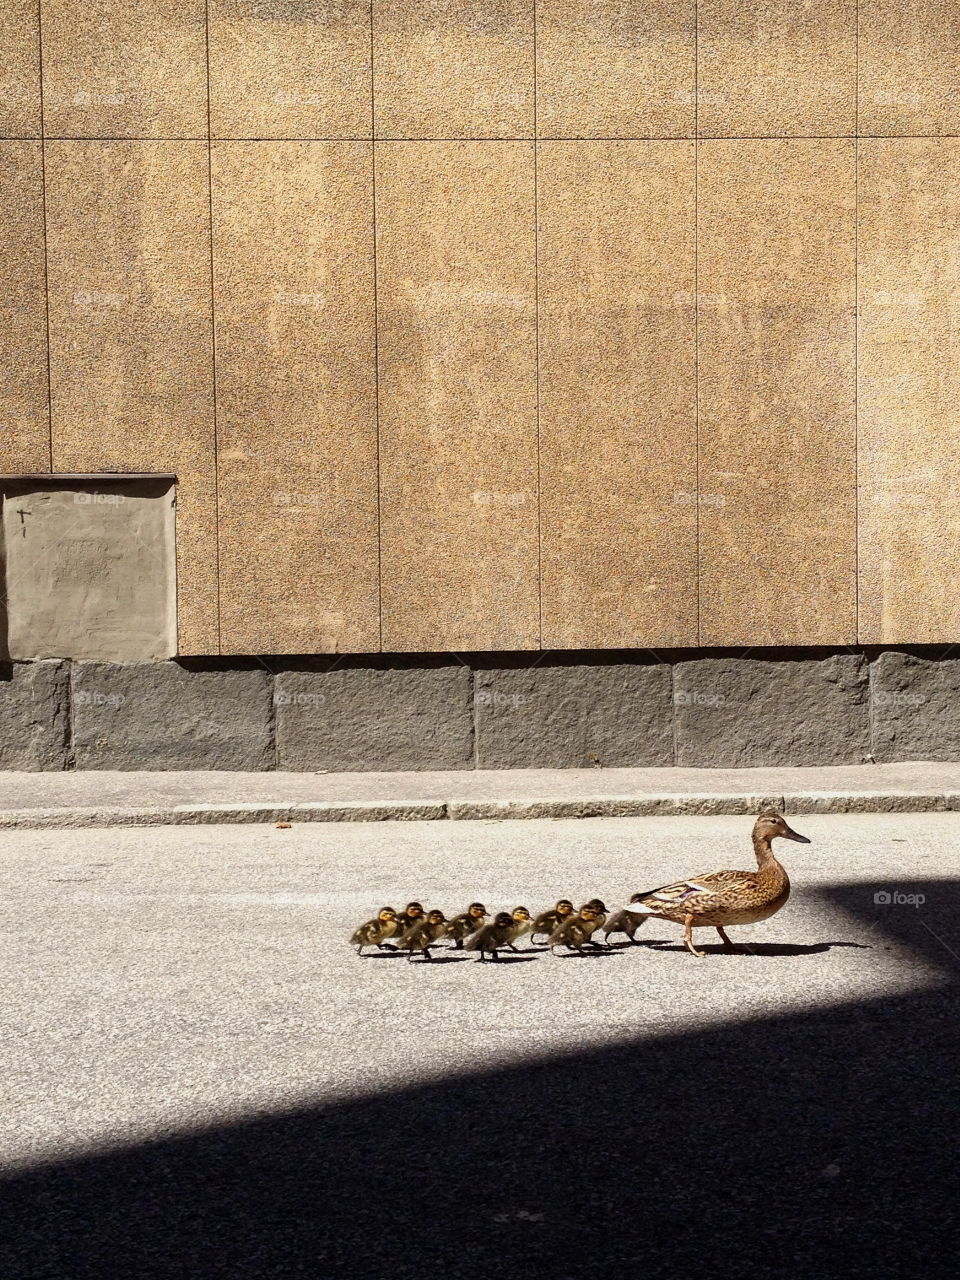 Duck family walking in the city